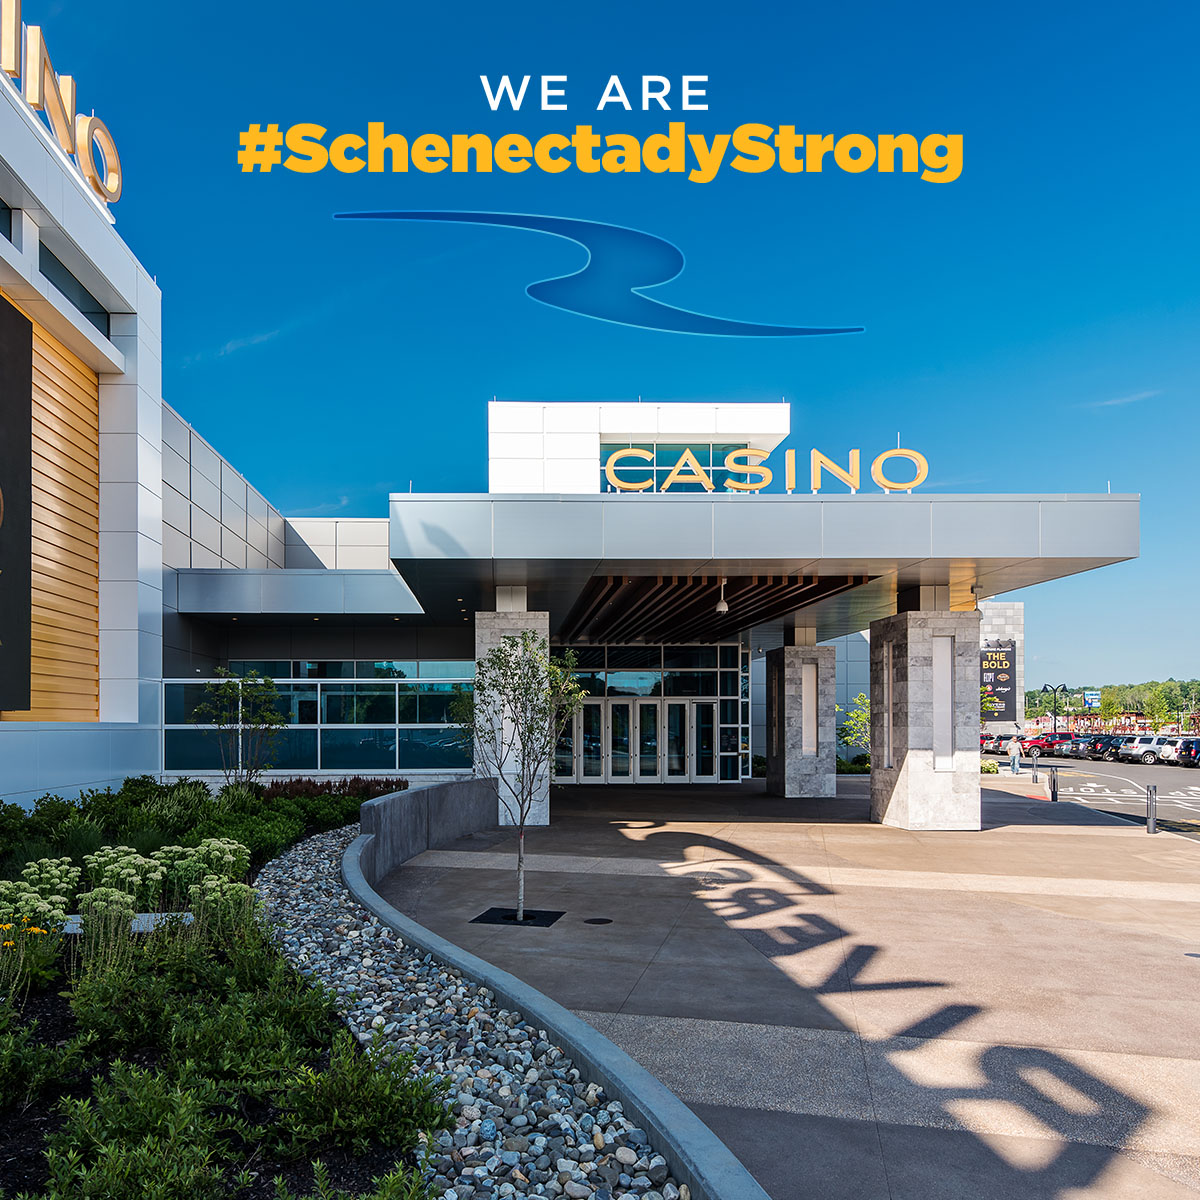 rivers casino events schenectady